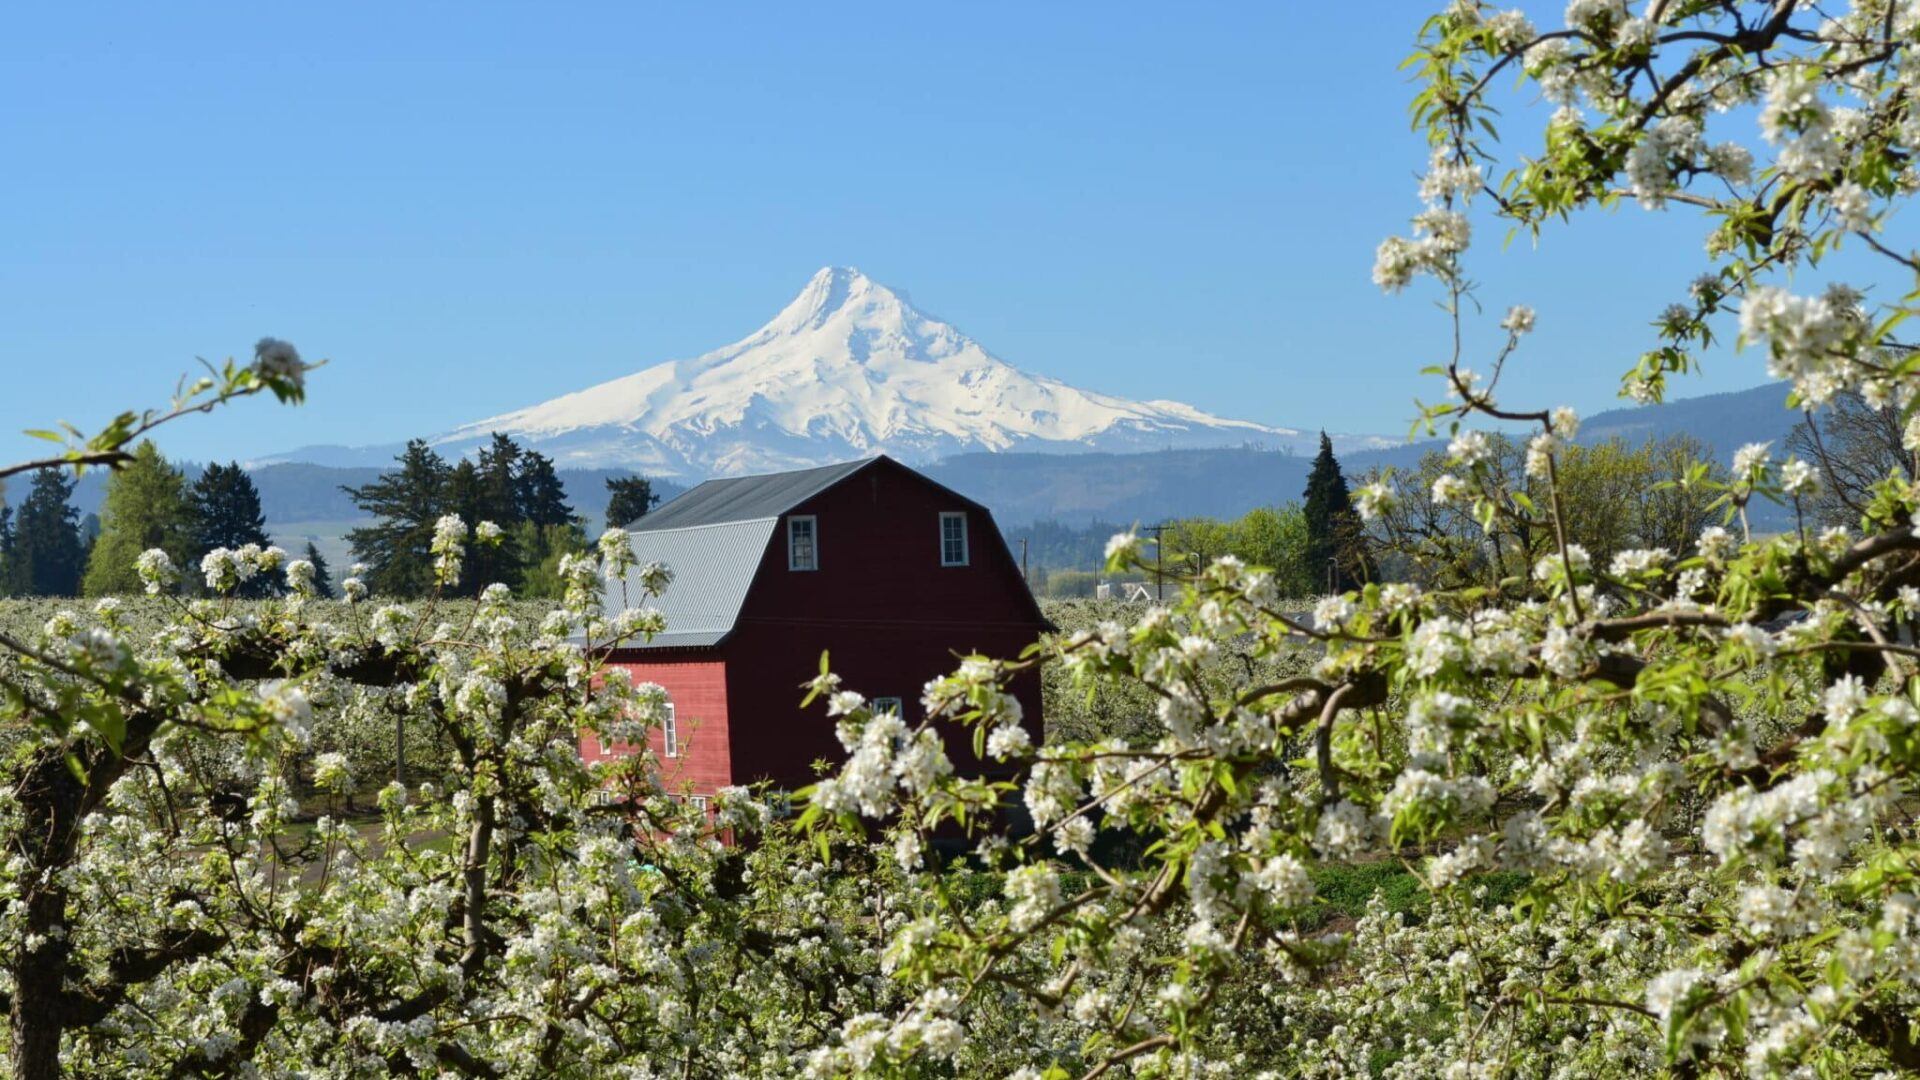 Red Barn surrounded by Pear Orchards in Bloom and Mt Hood